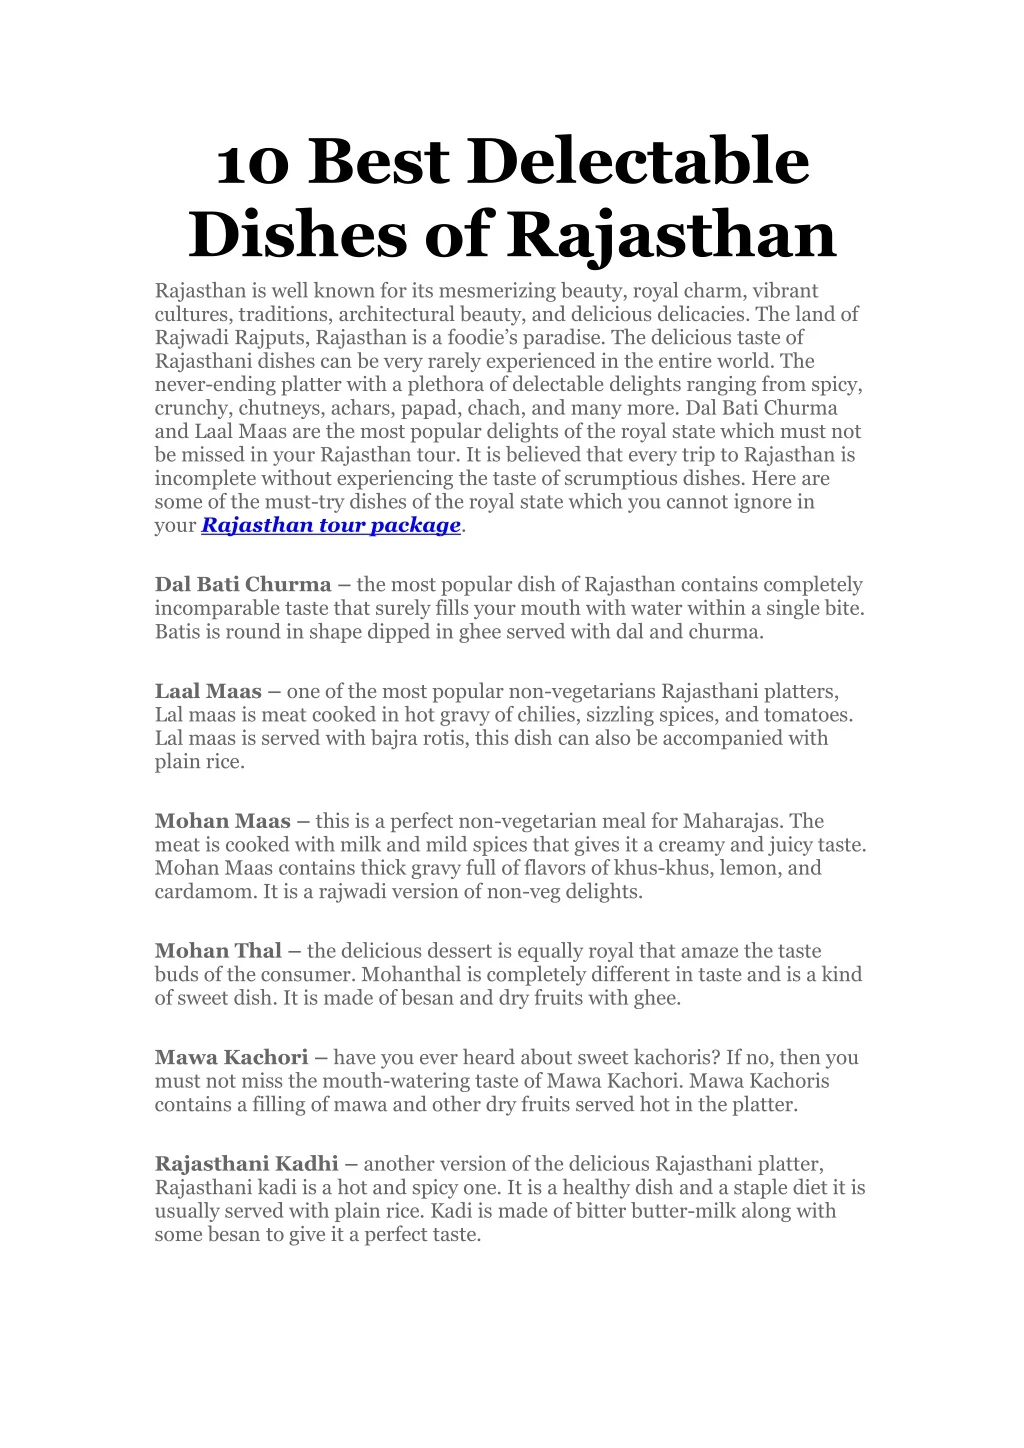 10 best delectable dishes of rajasthan rajasthan